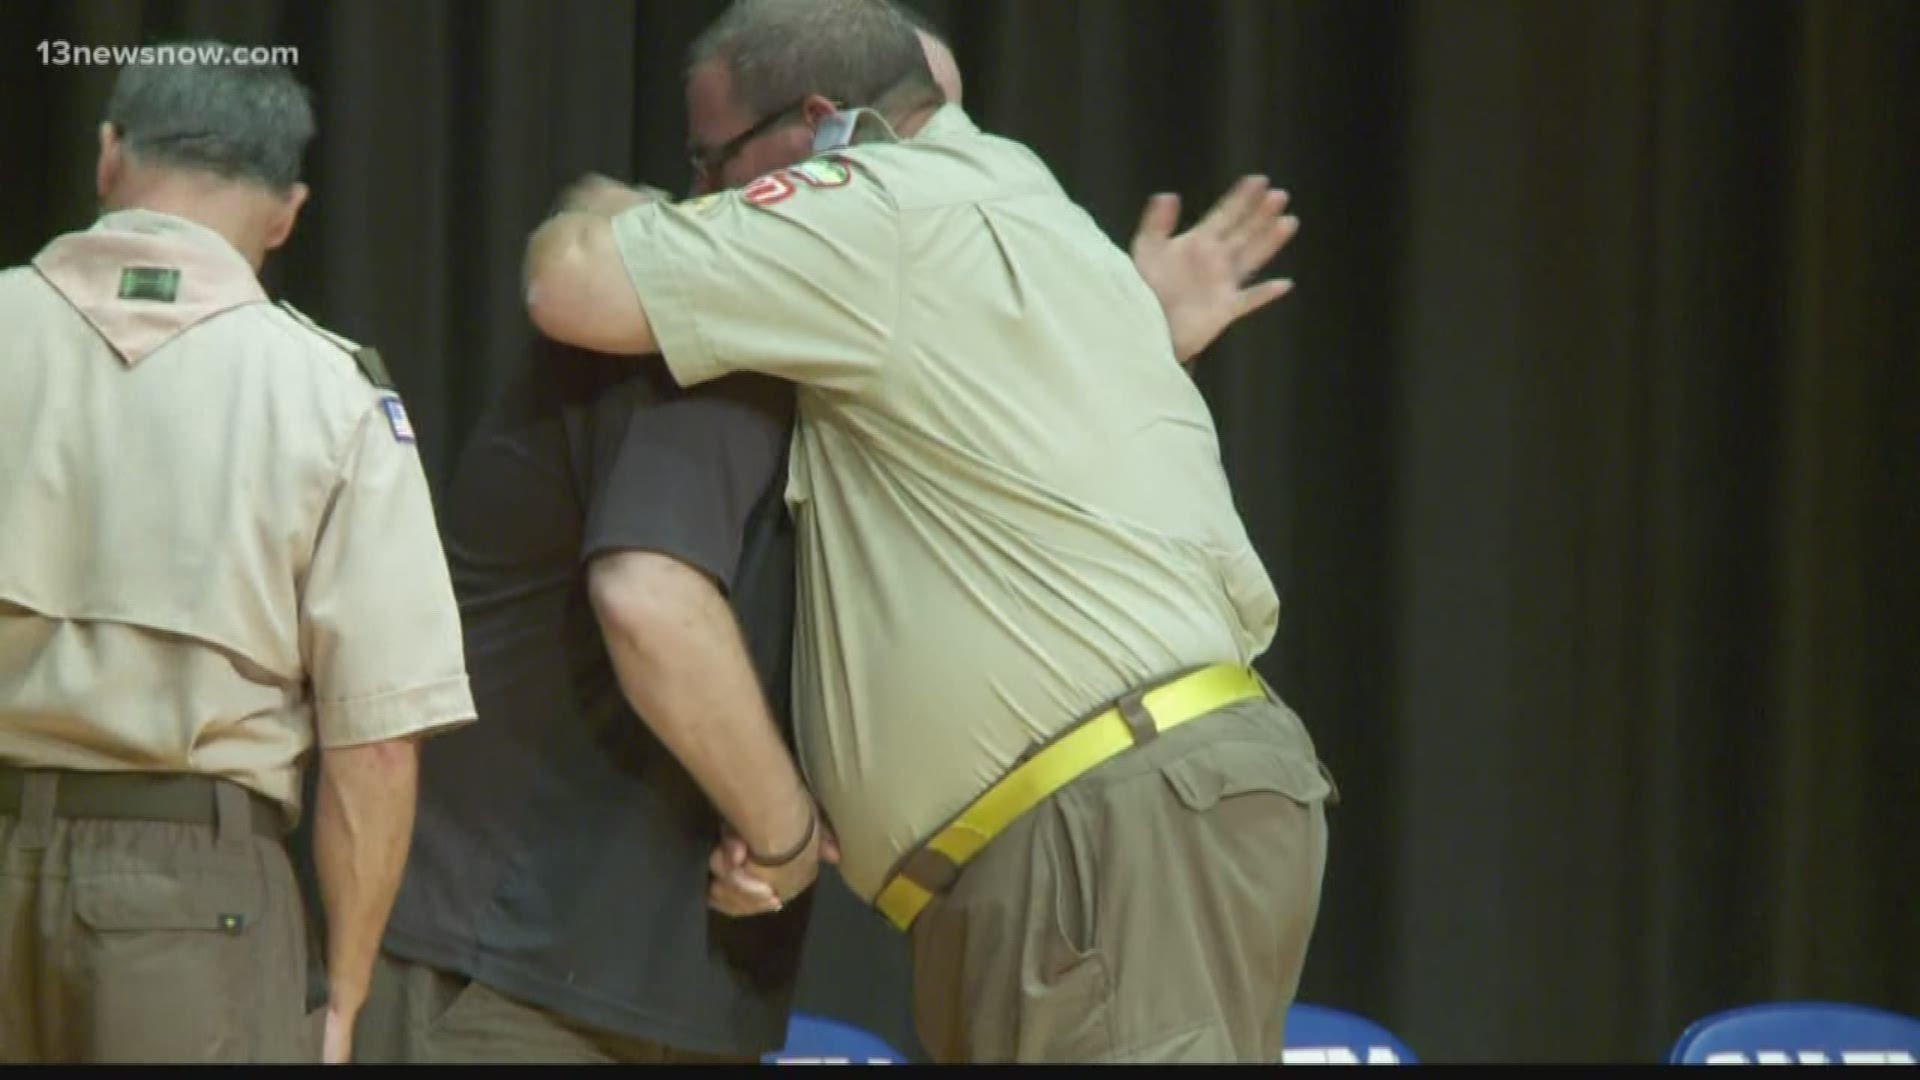 A local Boy Scout leader received a special honor for jumping into action at the scene of a horrific crash.